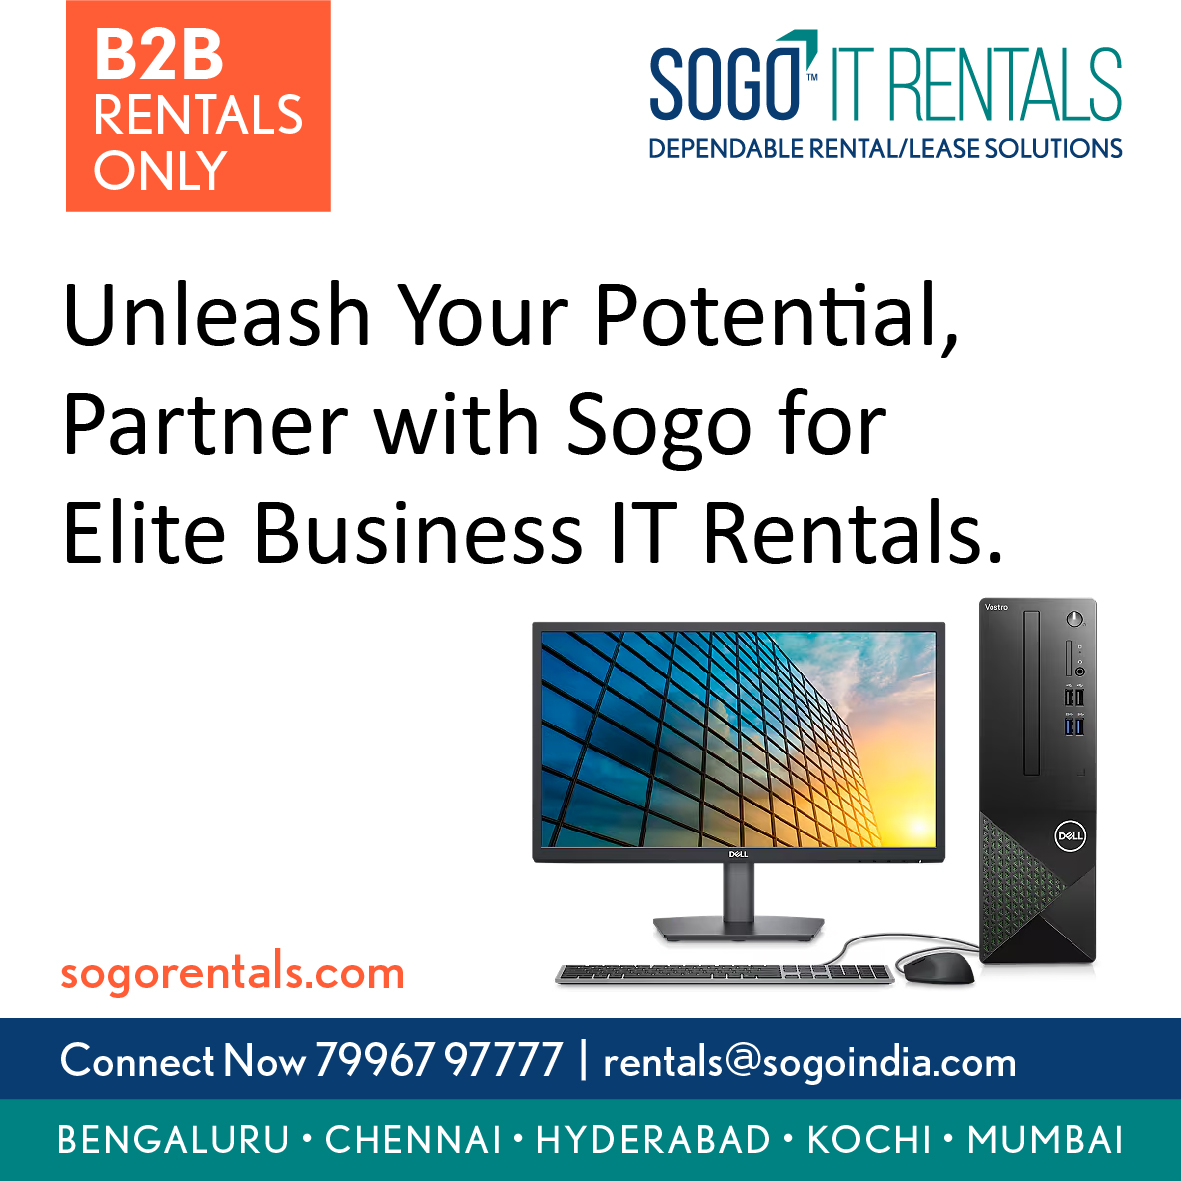 Unleash your business potential with elite IT rentals from SOGO. Partner with us for the best in technology and performance, tailored to meet your business needs. 🚀💼 #SogoITRentals #BusinessSolutions #TechRentals